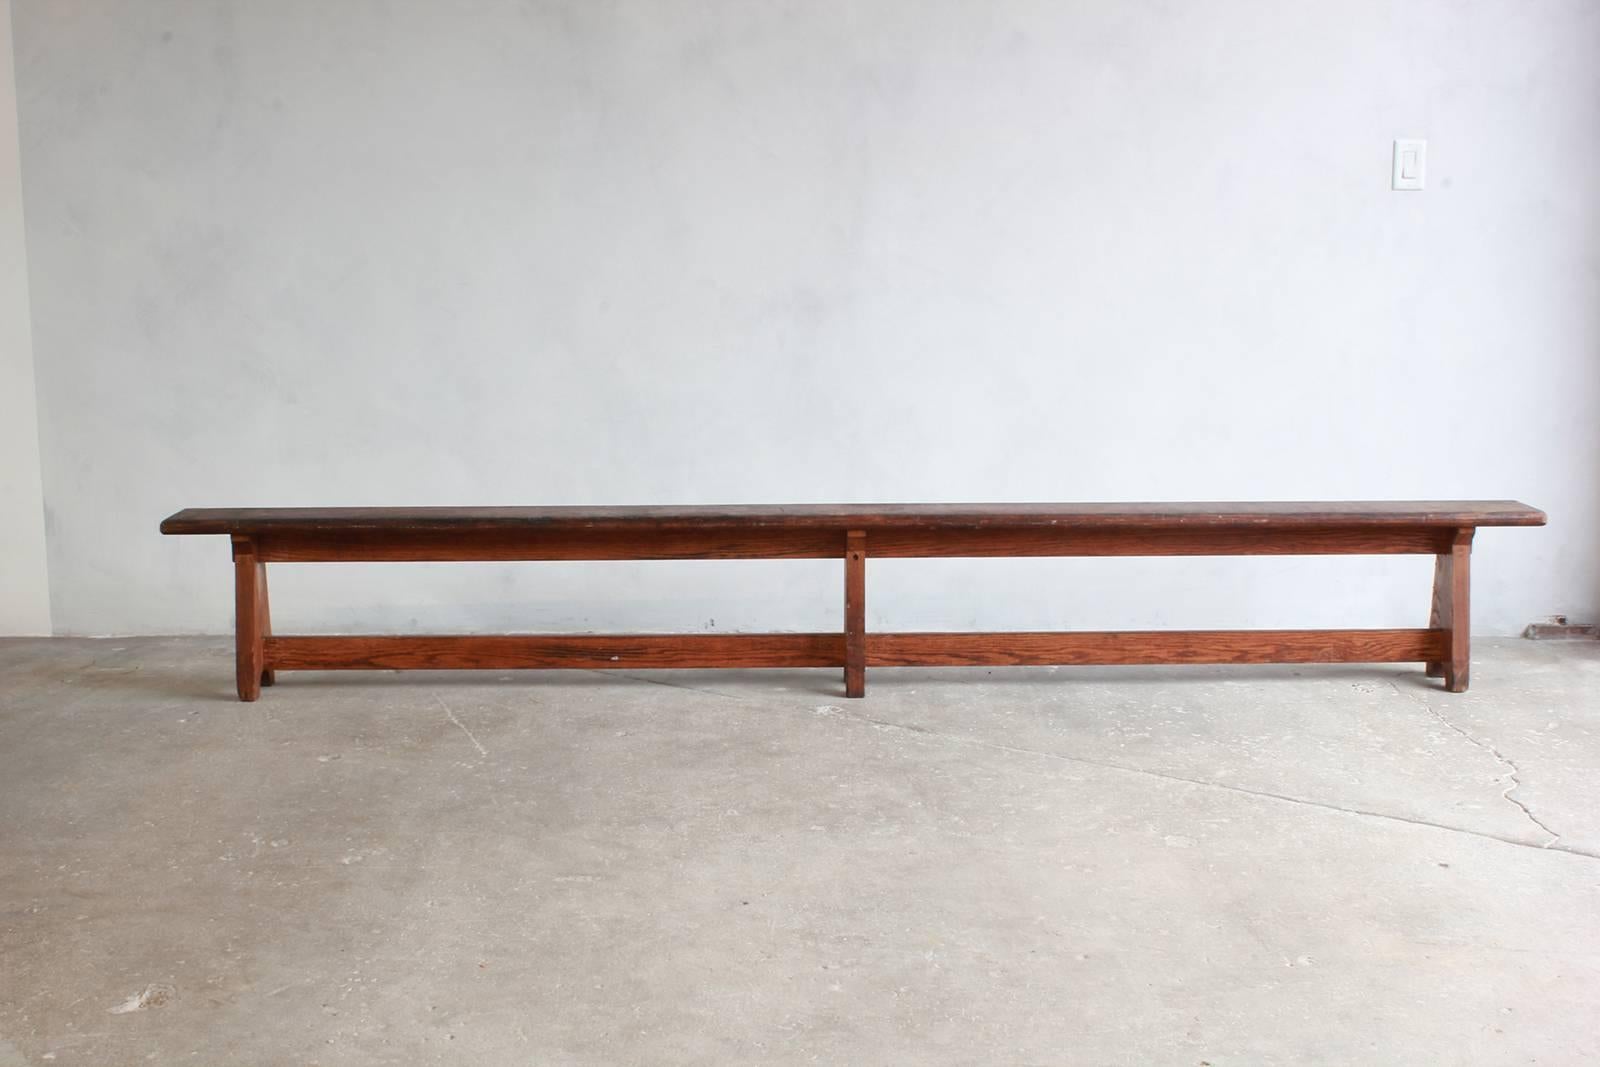 Long rustic bench with middle leg.